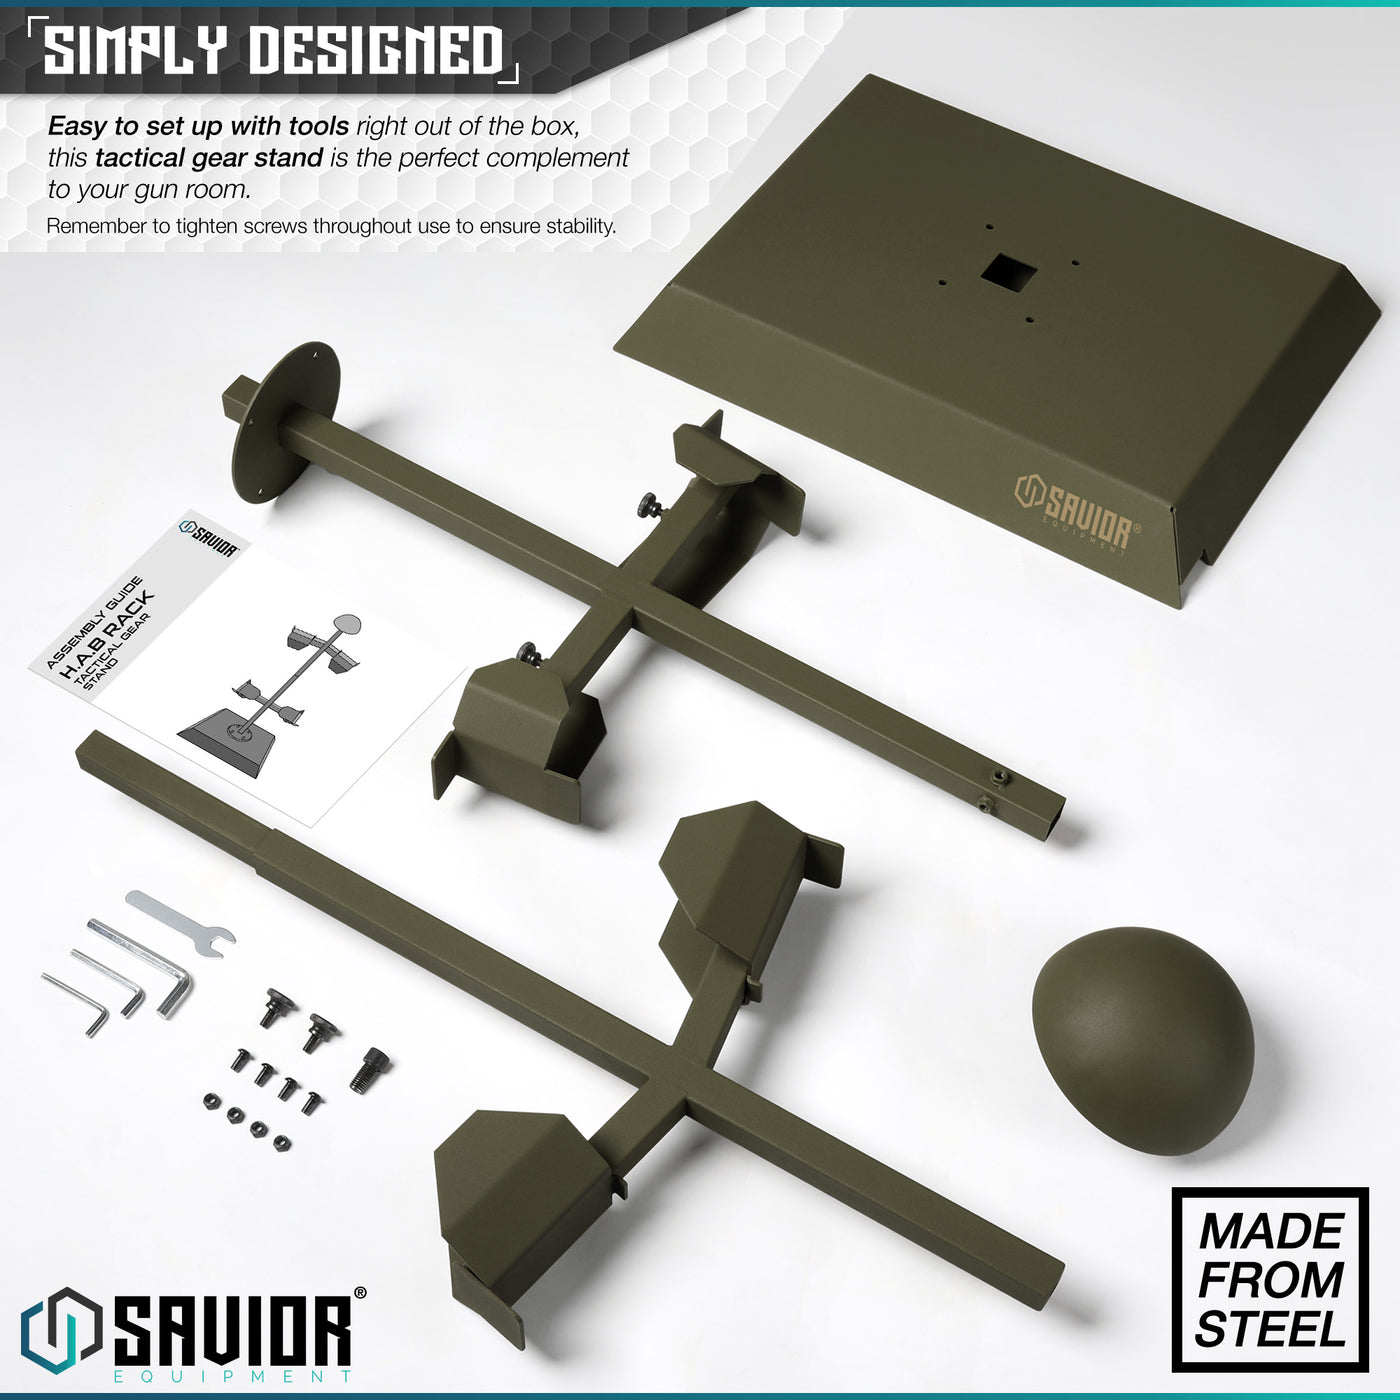 Simply Designed - Easy to set up with tools right out of the box, this tactical gear stand is the perfect complement to your gun room.One stand to rule them all, our H.A.B rack is as simple as it sounds. It displays your helmet, armor/chestrig, belt and is a perfect complement to any gun room. Remeber to tighten screws throughout use to ensure stability.